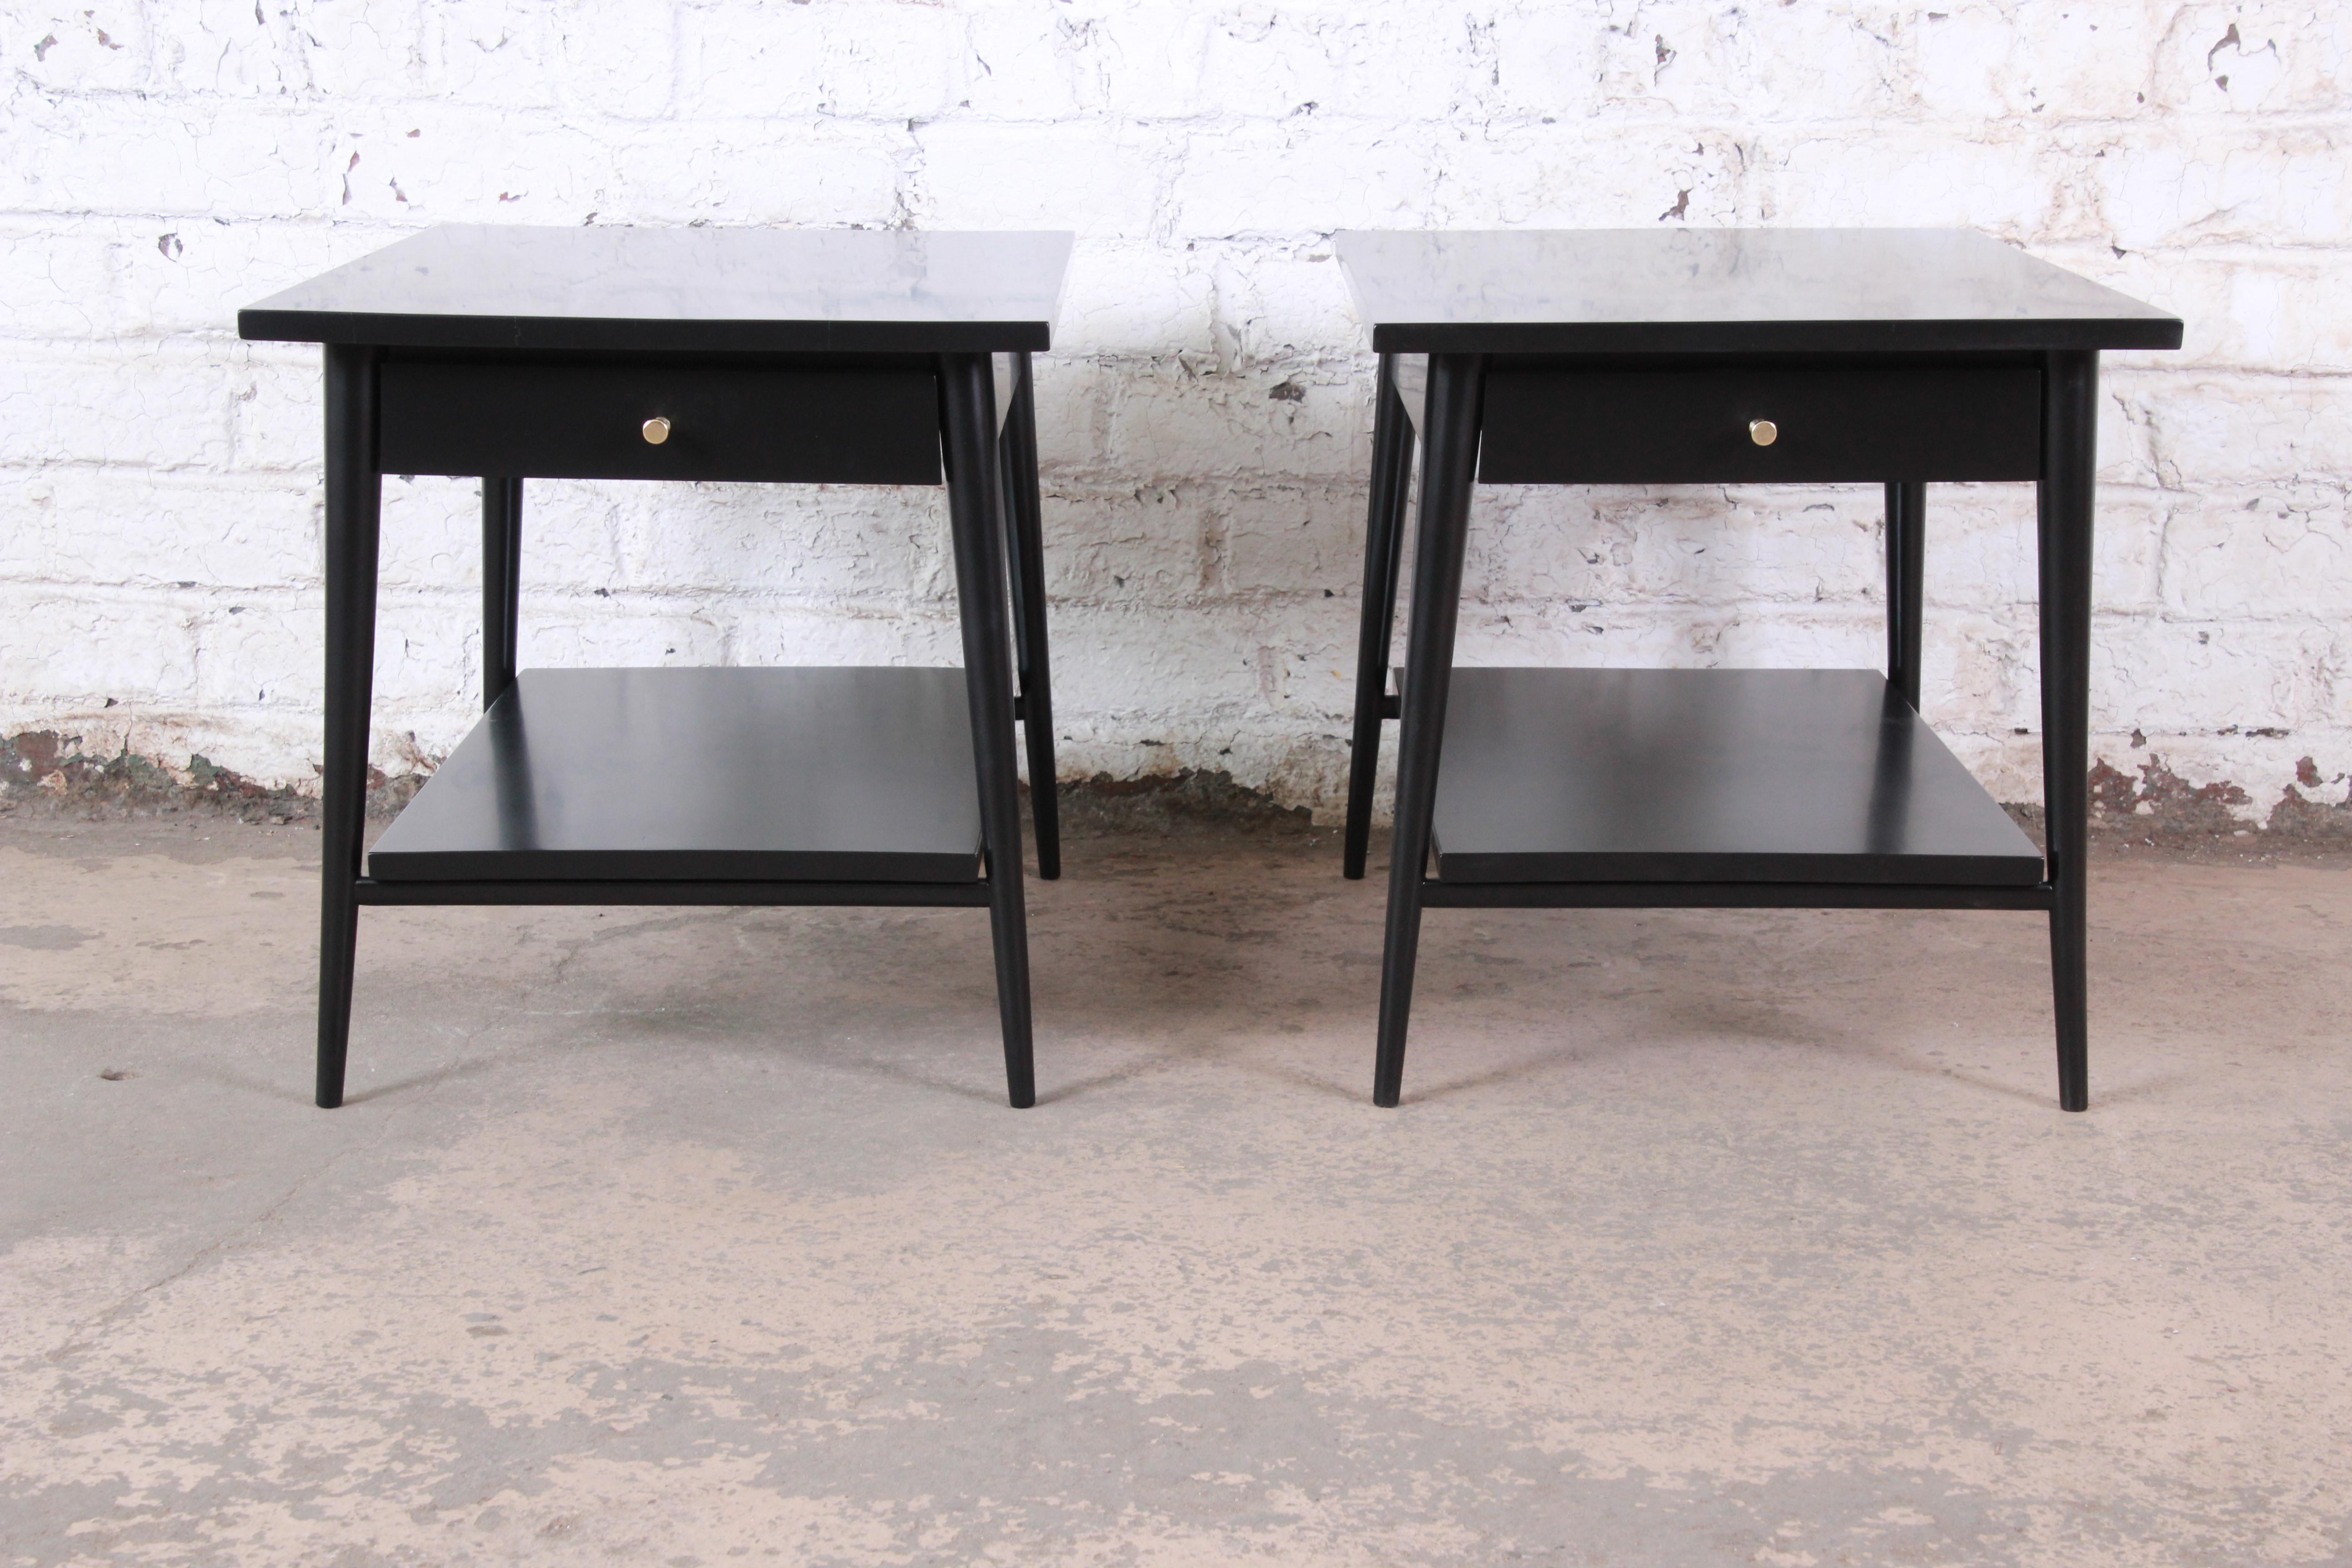 An exceptional pair of Mid-Century Modern black lacquered nightstands or end tables

Designed by Paul McCobb for his planner group line for Winchendon Furniture

USA, 1950s

Solid birch and black lacquer and brass

Measures: 19.25